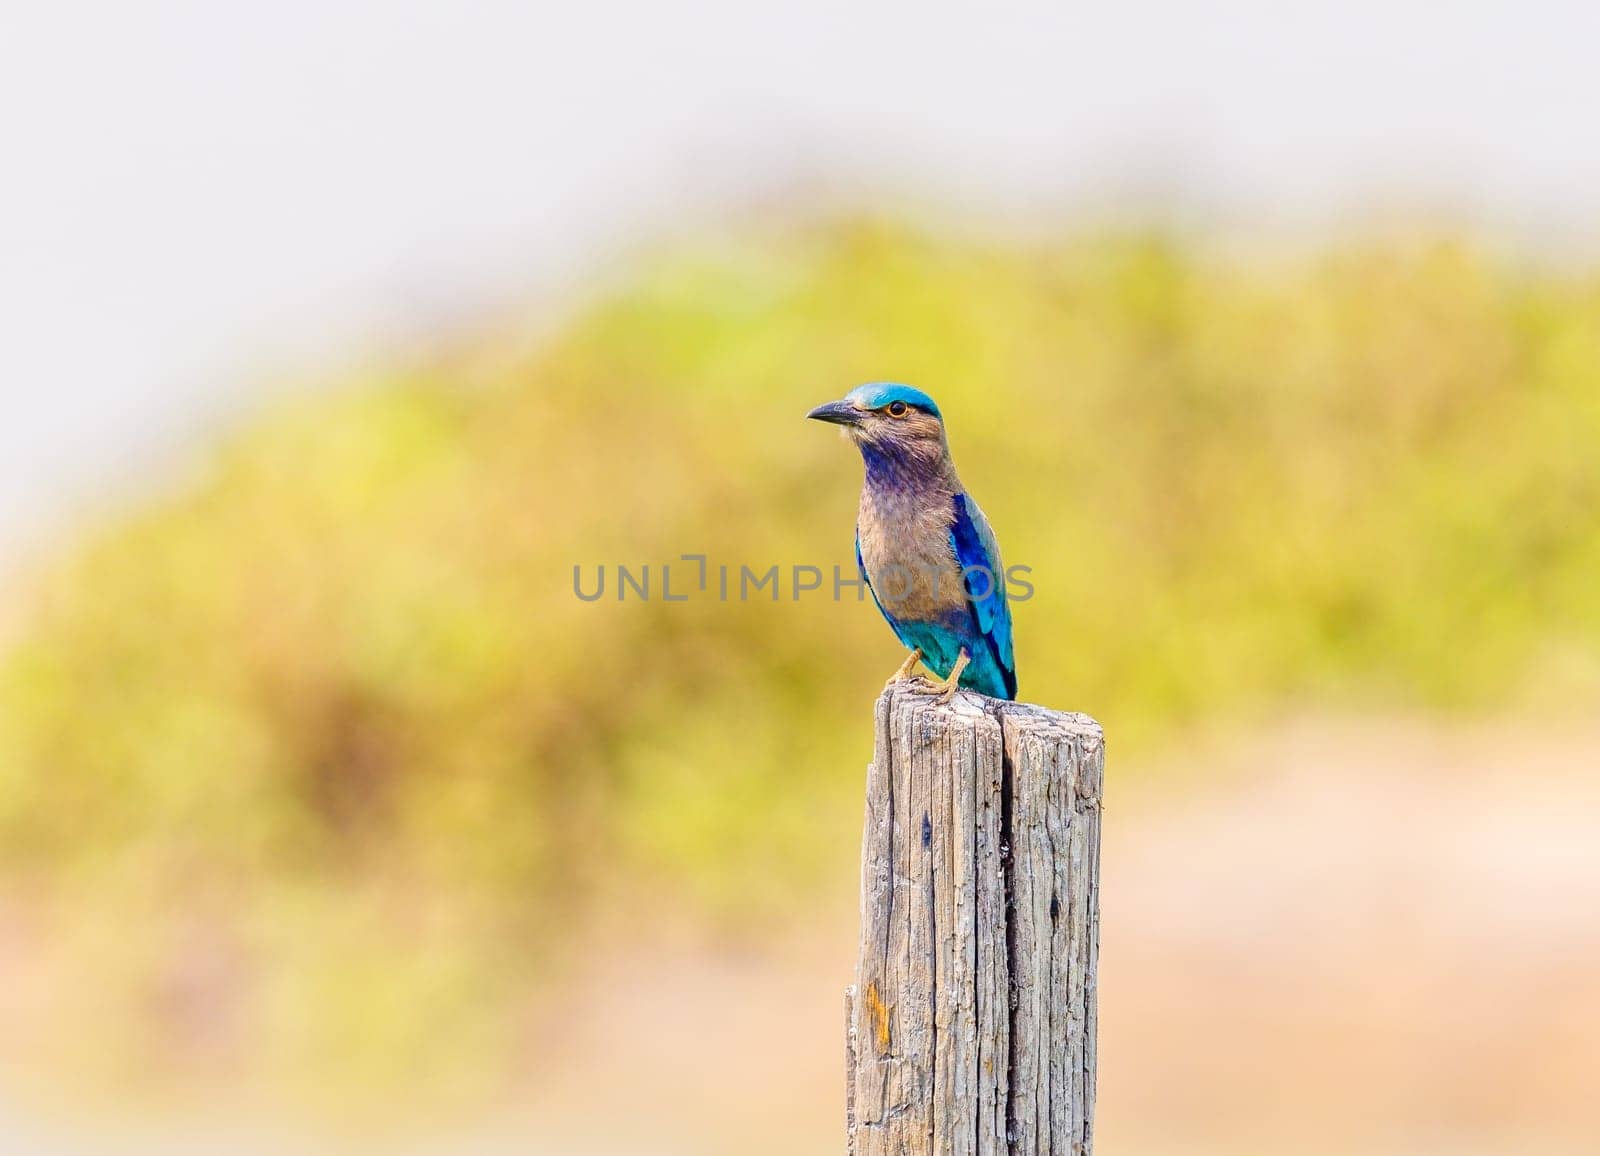 An Indochinese Roller perched on a stump by Rajh_Photography